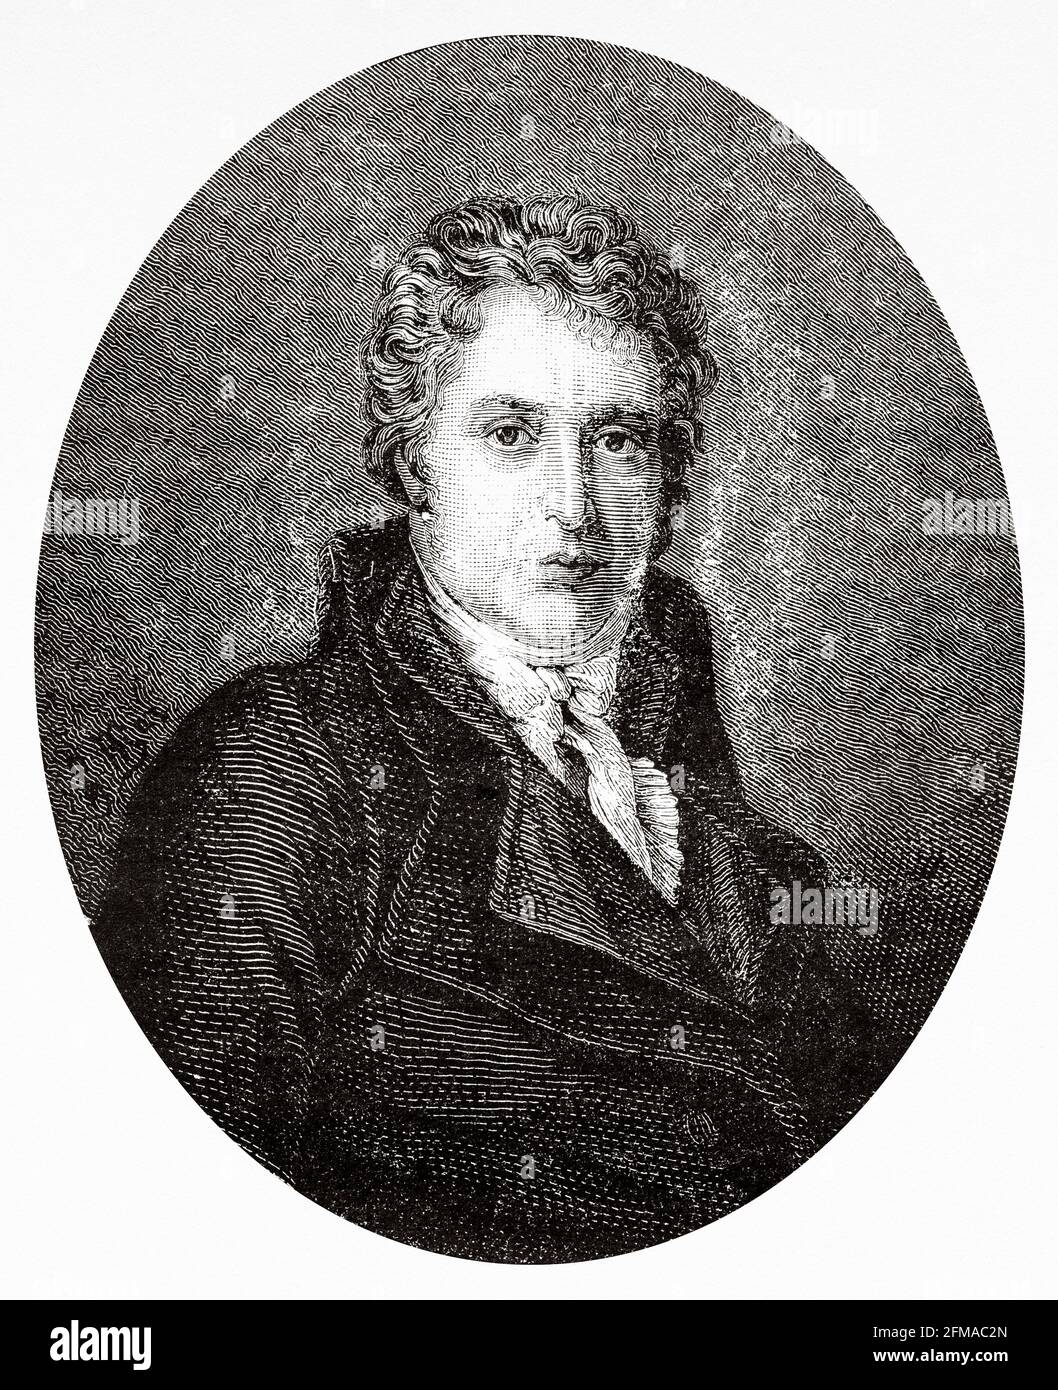 Portrait of Jacques-Louis David (1748-1825) was a French painter in the Neoclassical style, considered to be the preeminent painter of the era. Active supporter of the French Revolution and friend of Maximilien Robespierre. France. Old 19th century engraved illustration from Histoire de la Revolution Francaise 1876 by Jules Michelet (1798-1874) Stock Photo